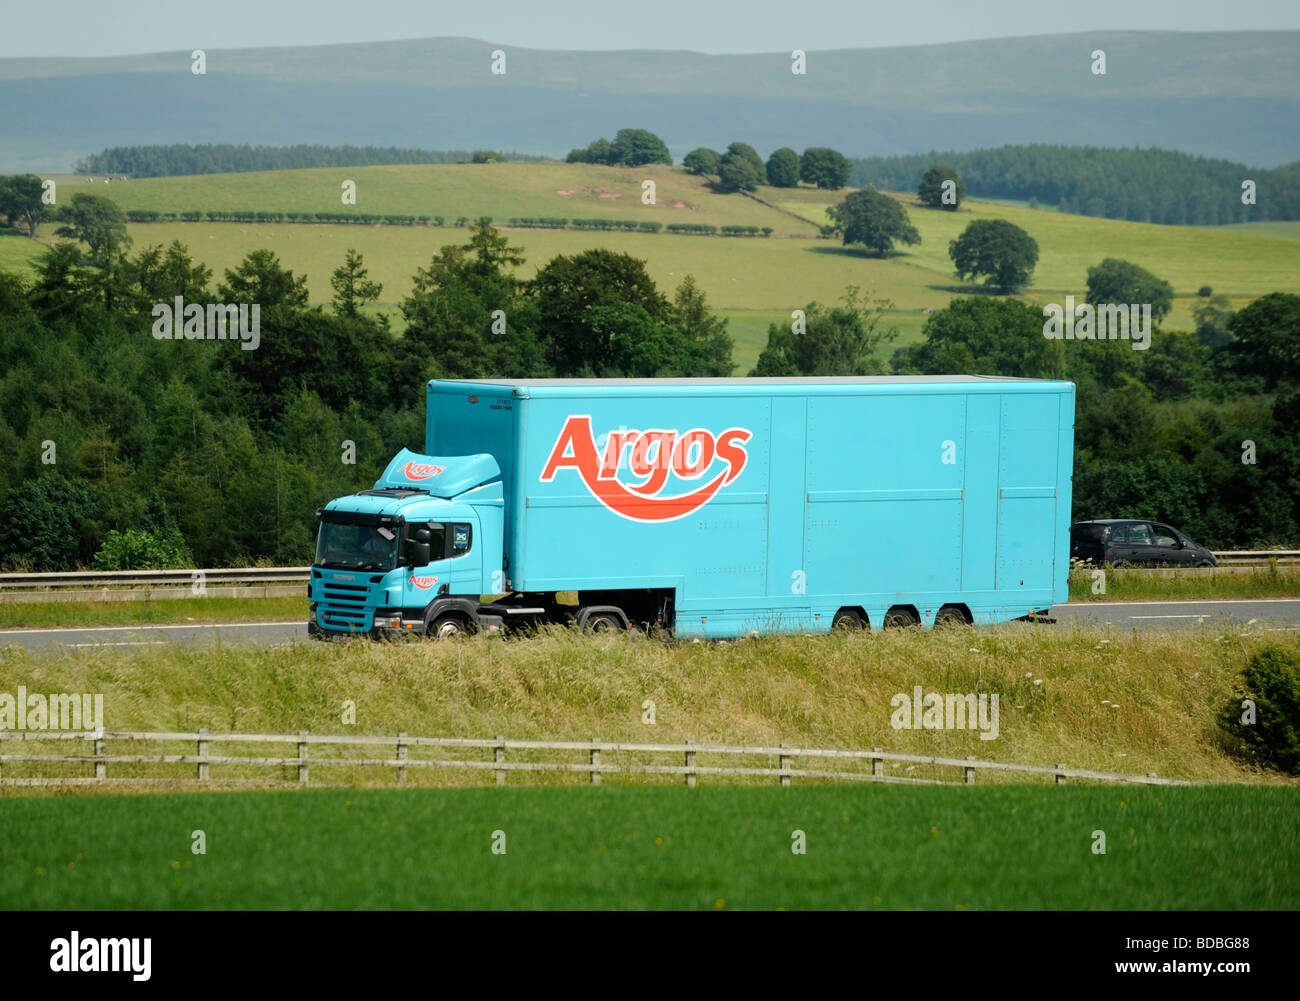 Scania truck with double deck high capacity trailer Argos Stock Photo